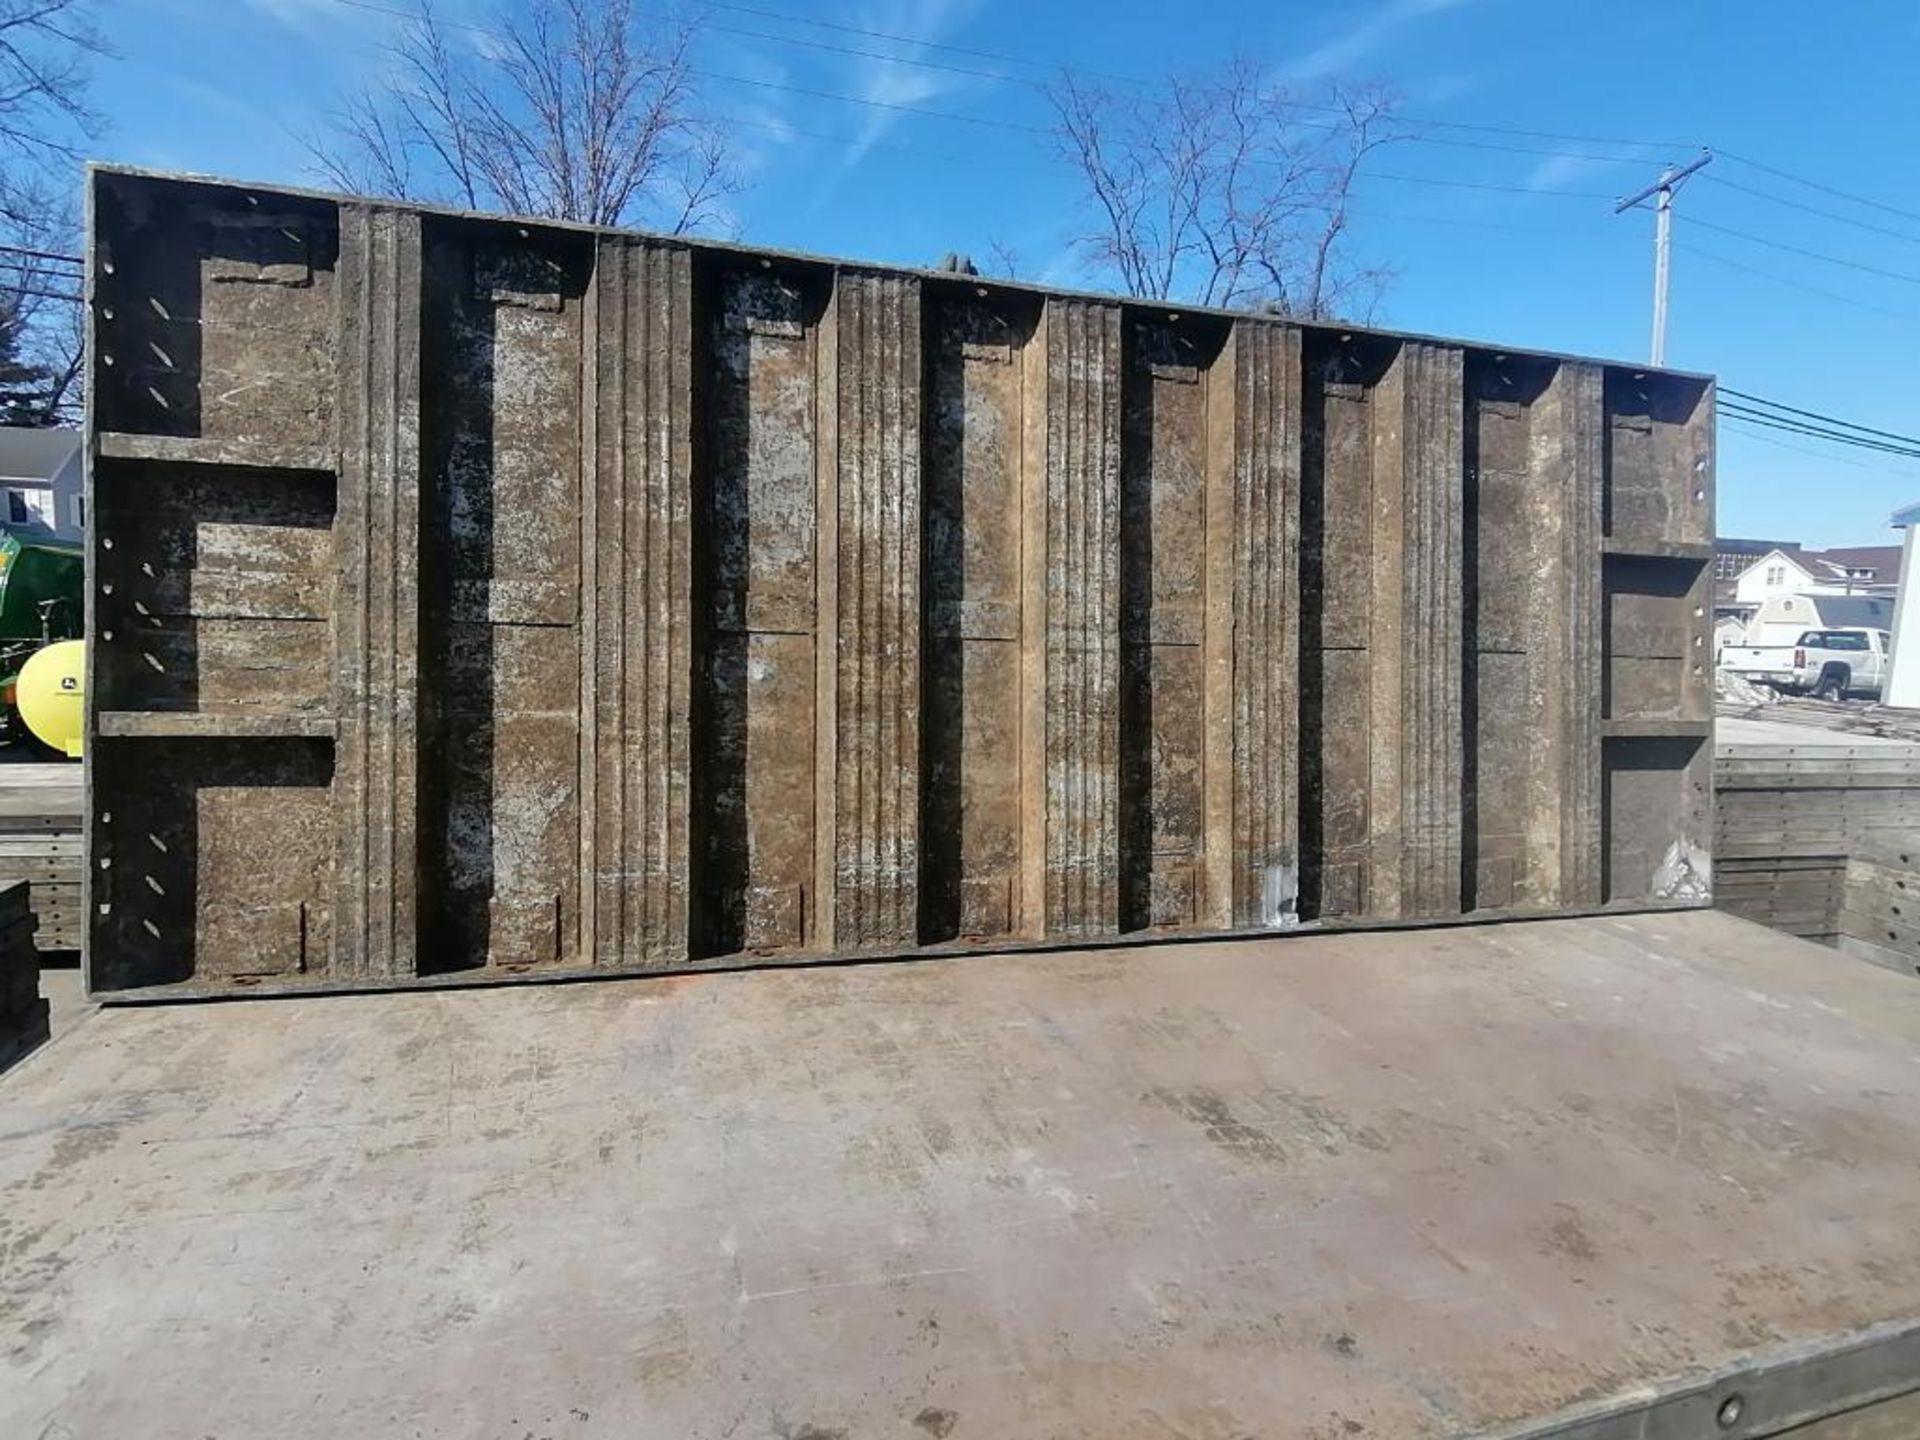 (20) 3' x 8' Wall-Ties Smooth Aluminum Concrete Forms 6-12 Hole Pattern. Located in Mt. Pleasant, - Image 12 of 12